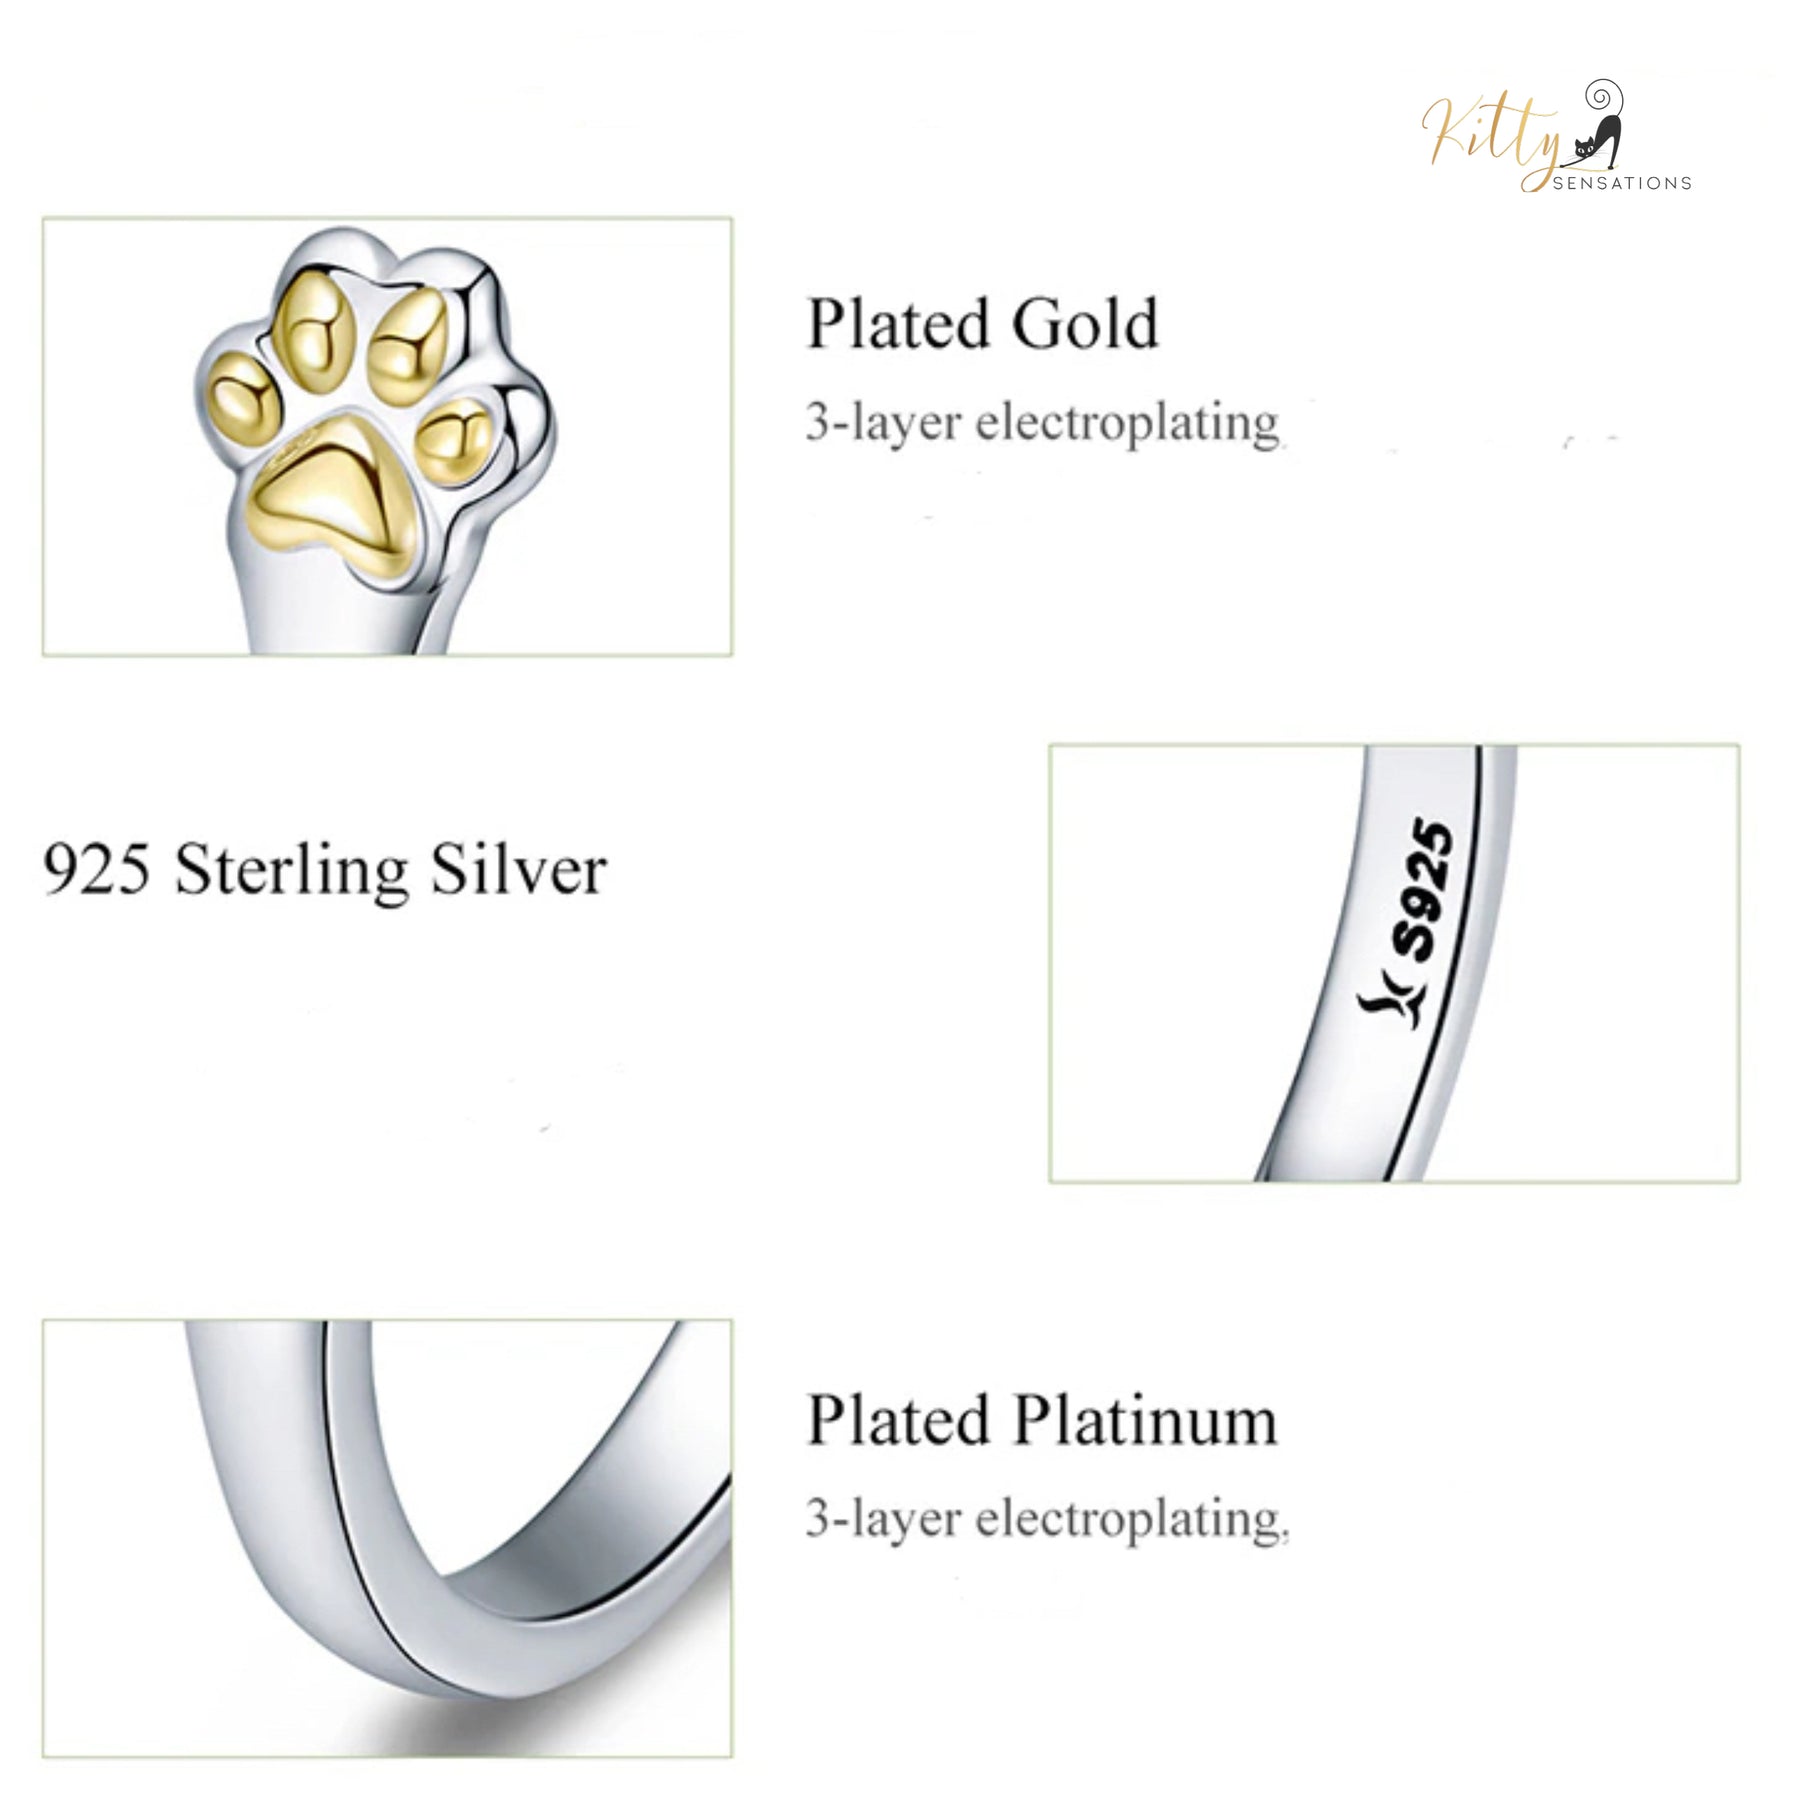 Golden Paws Cat Ring in Solid 925 Sterling Silver (Platinum and Gold Plated) - Adjustable Size